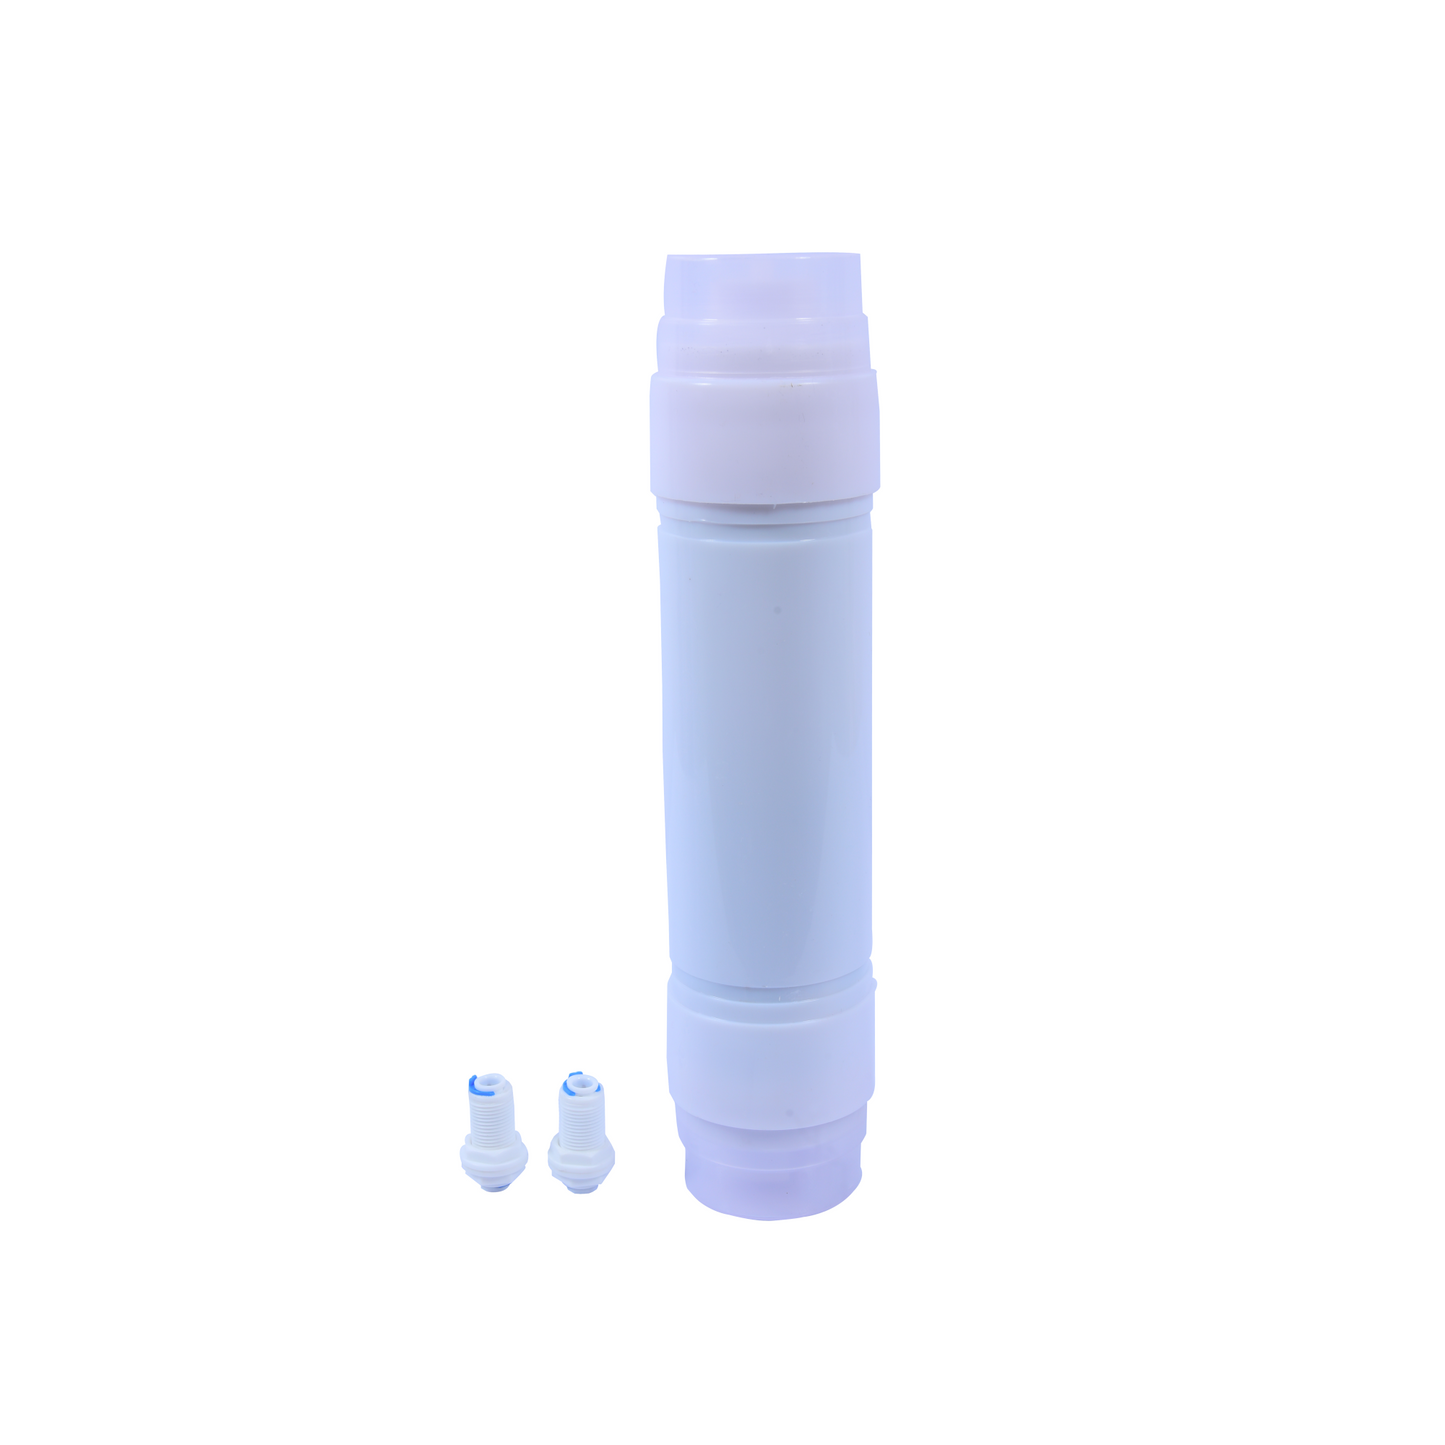 RO-PC1 RO-Pure Pre-Carbon Filter for RO Water Purifier | RO spare parts